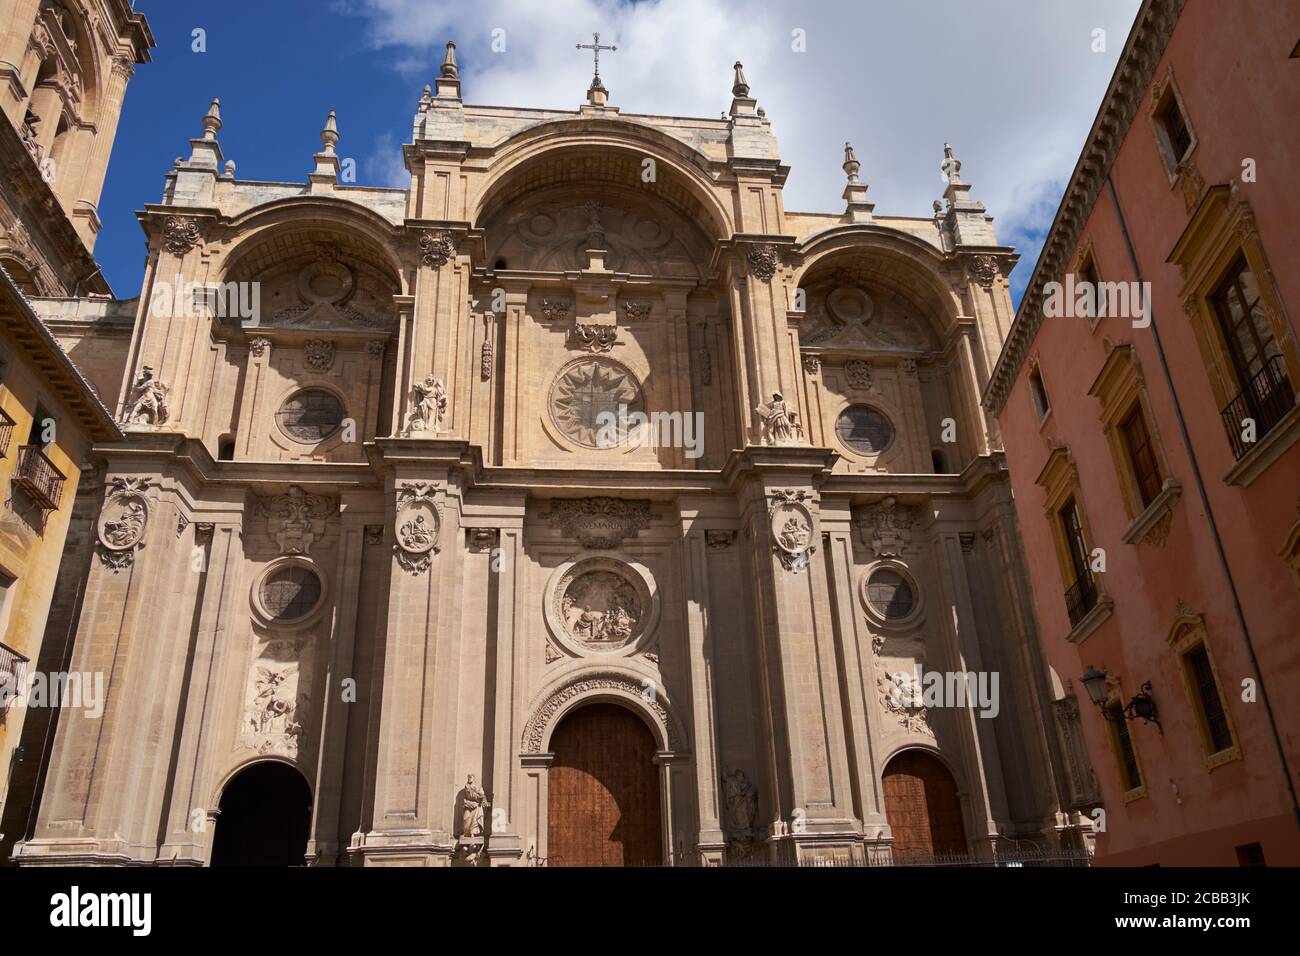 Granada Cathedral (or Cathedral of the Incarnation), Granada, Analusia, Spain. Stock Photo